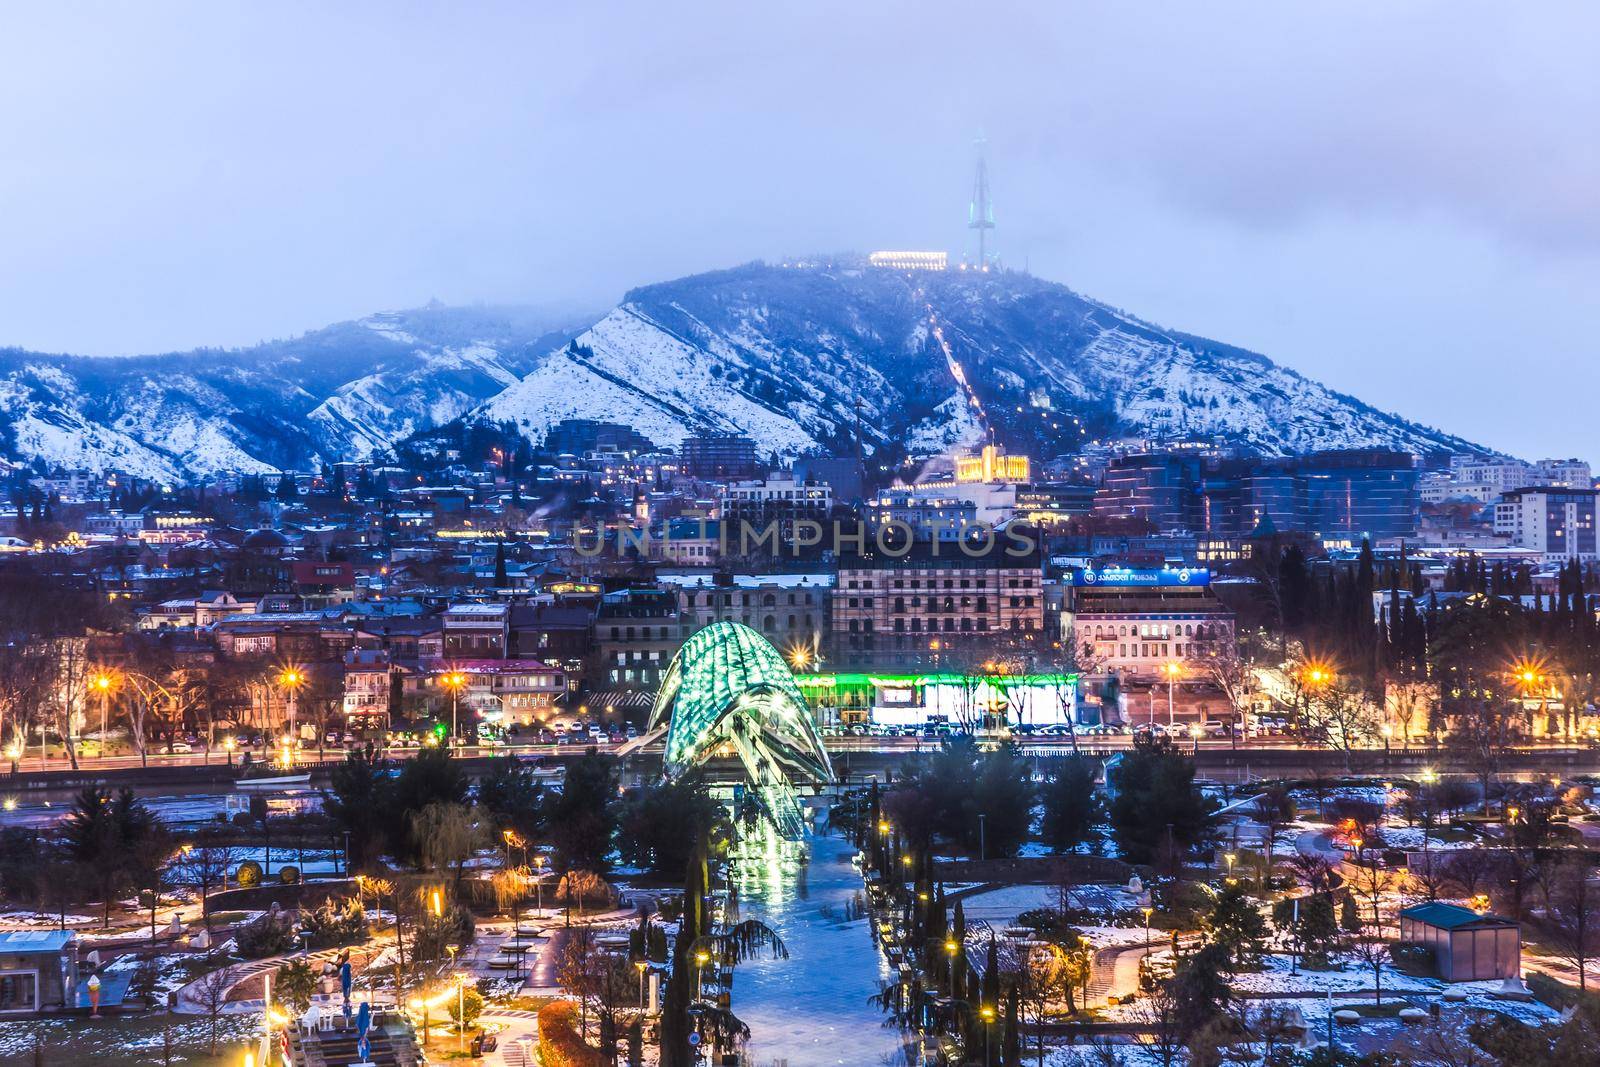 Snowing in Tbilisi city in the evening by Elet